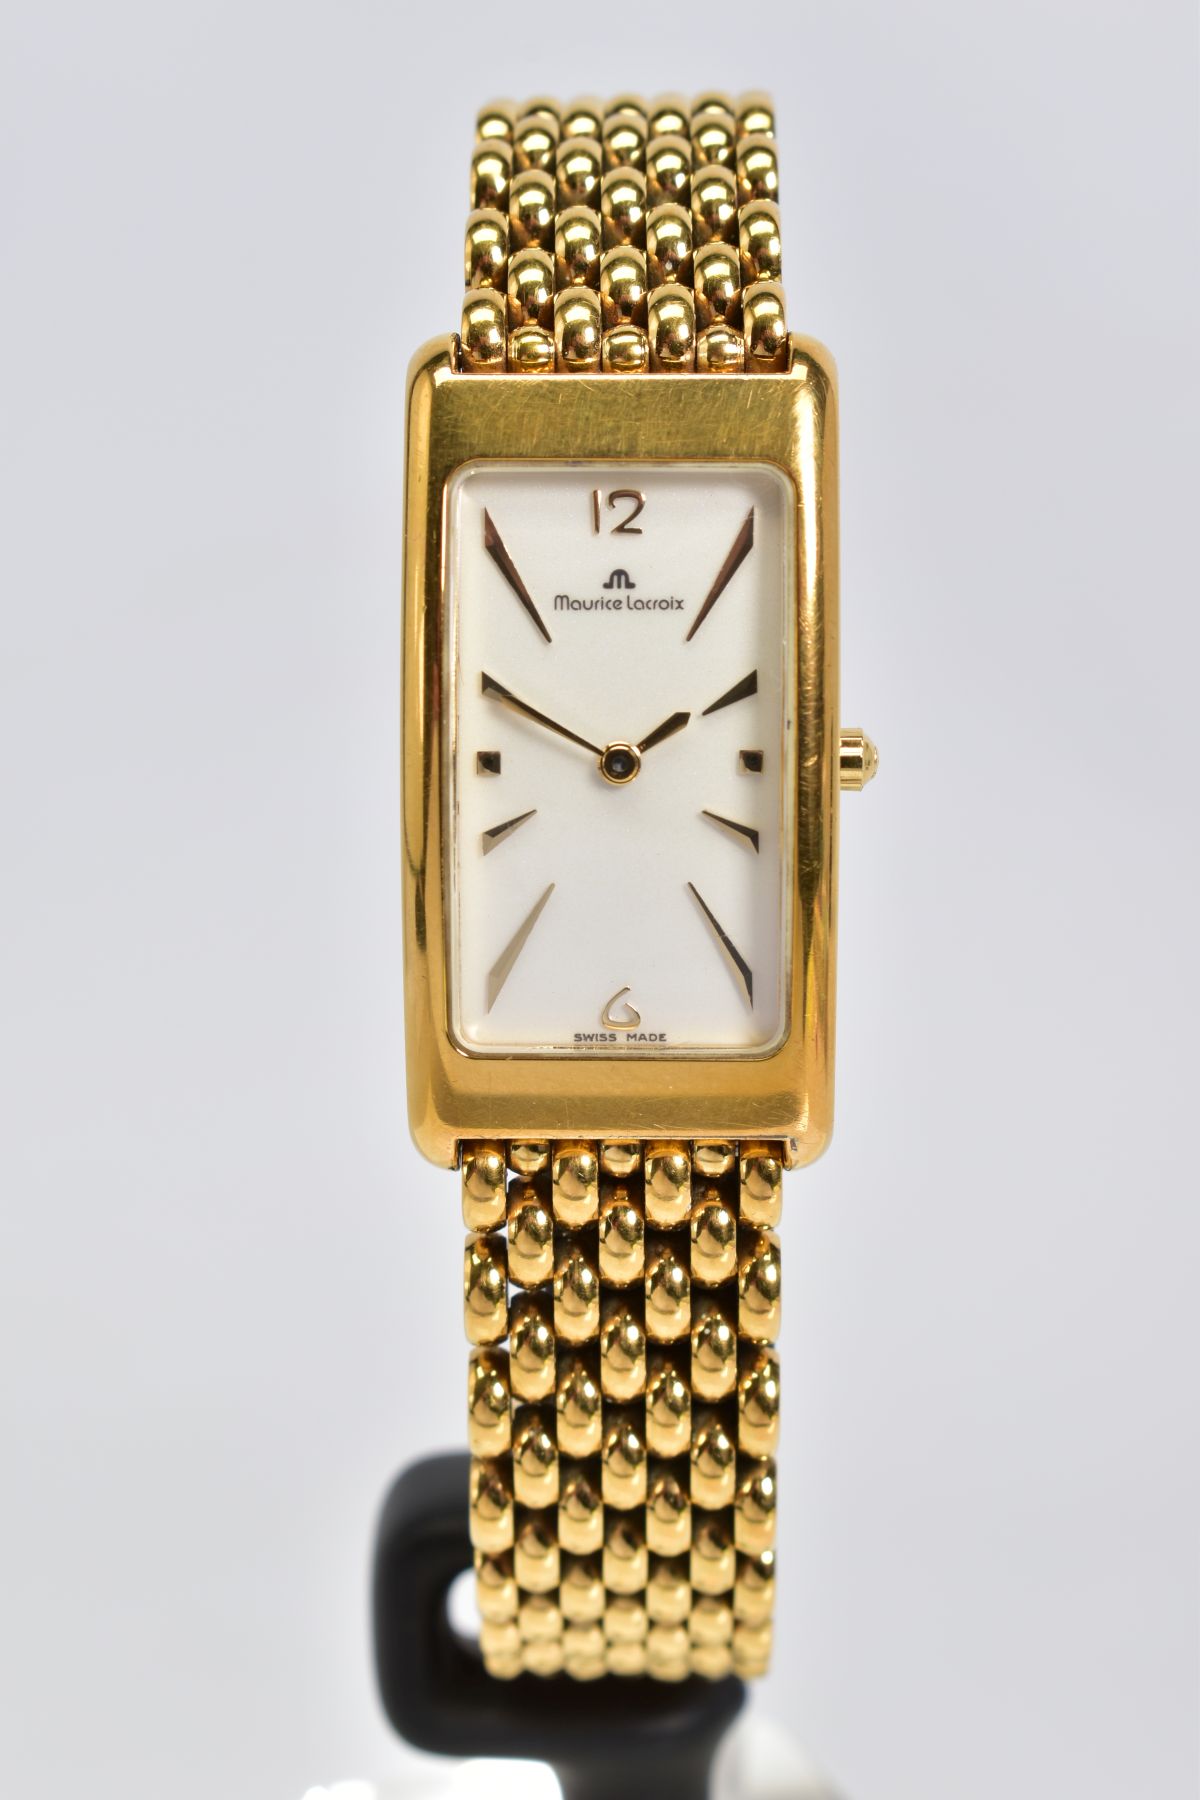 A GOLD PLATED MAURICE LACRIOX WRISTWATCH AND BOX, white dial with baton and Arabic numeral